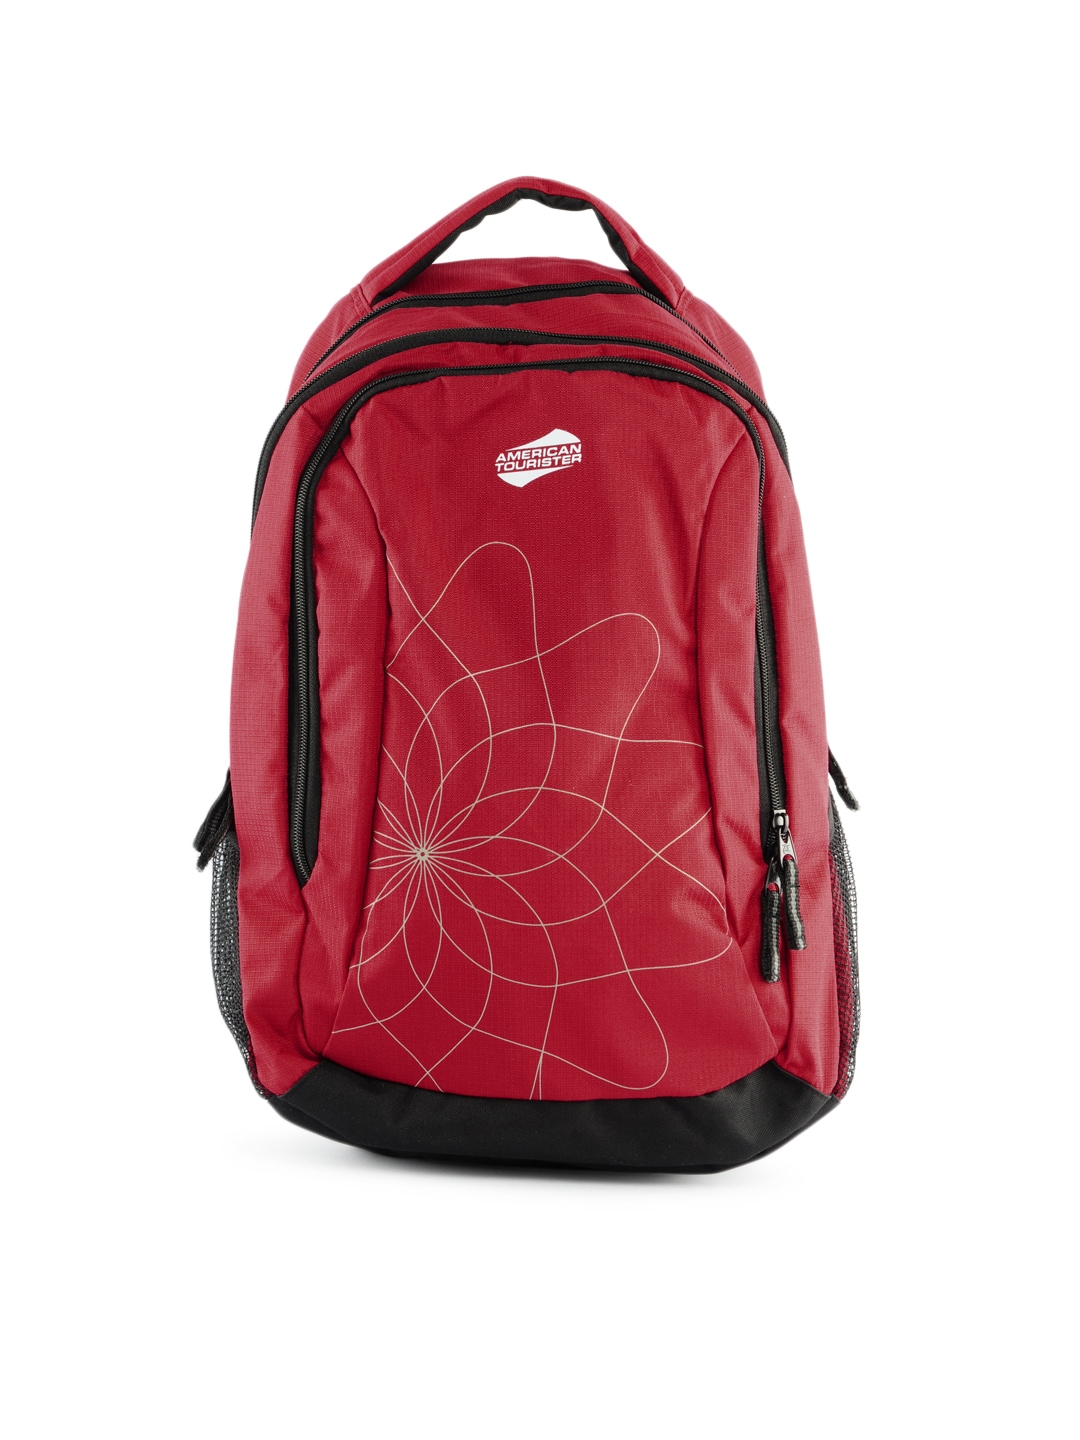 American Tourister Unisex Code Red Backpack